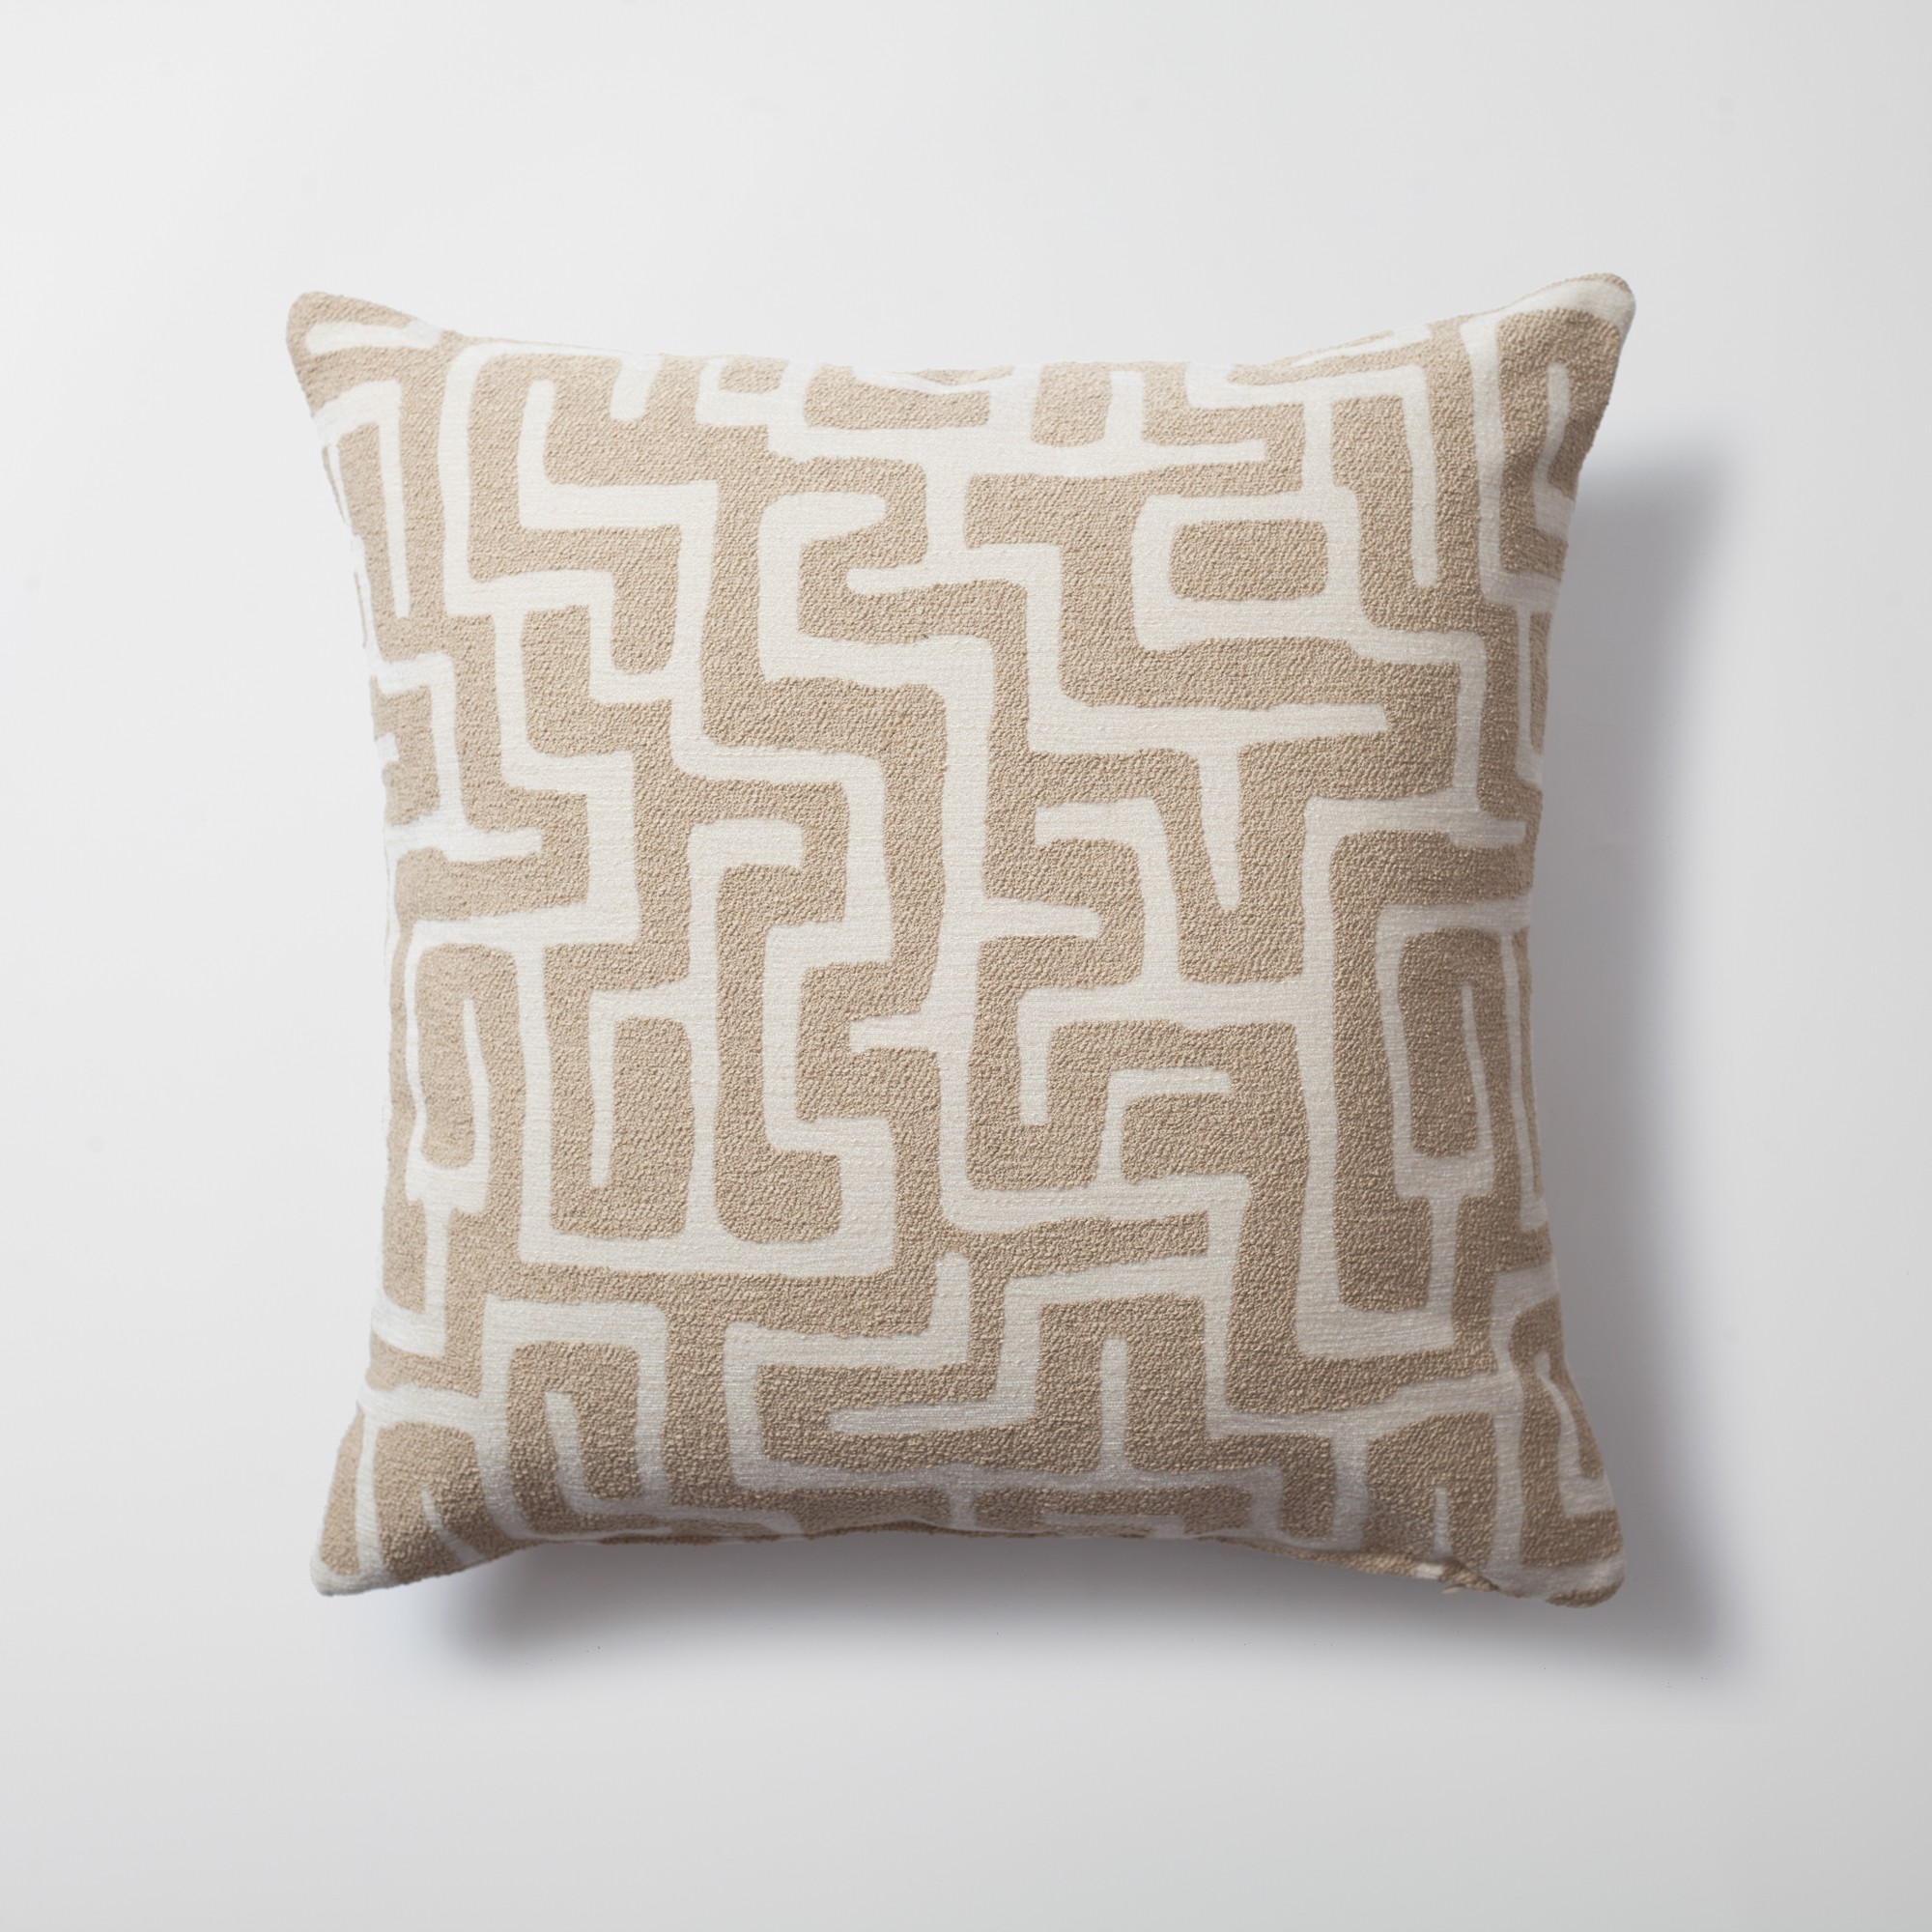 "Norm" - Maze Patterned 20x20 Inch Pillow - Cream (Cover Only)